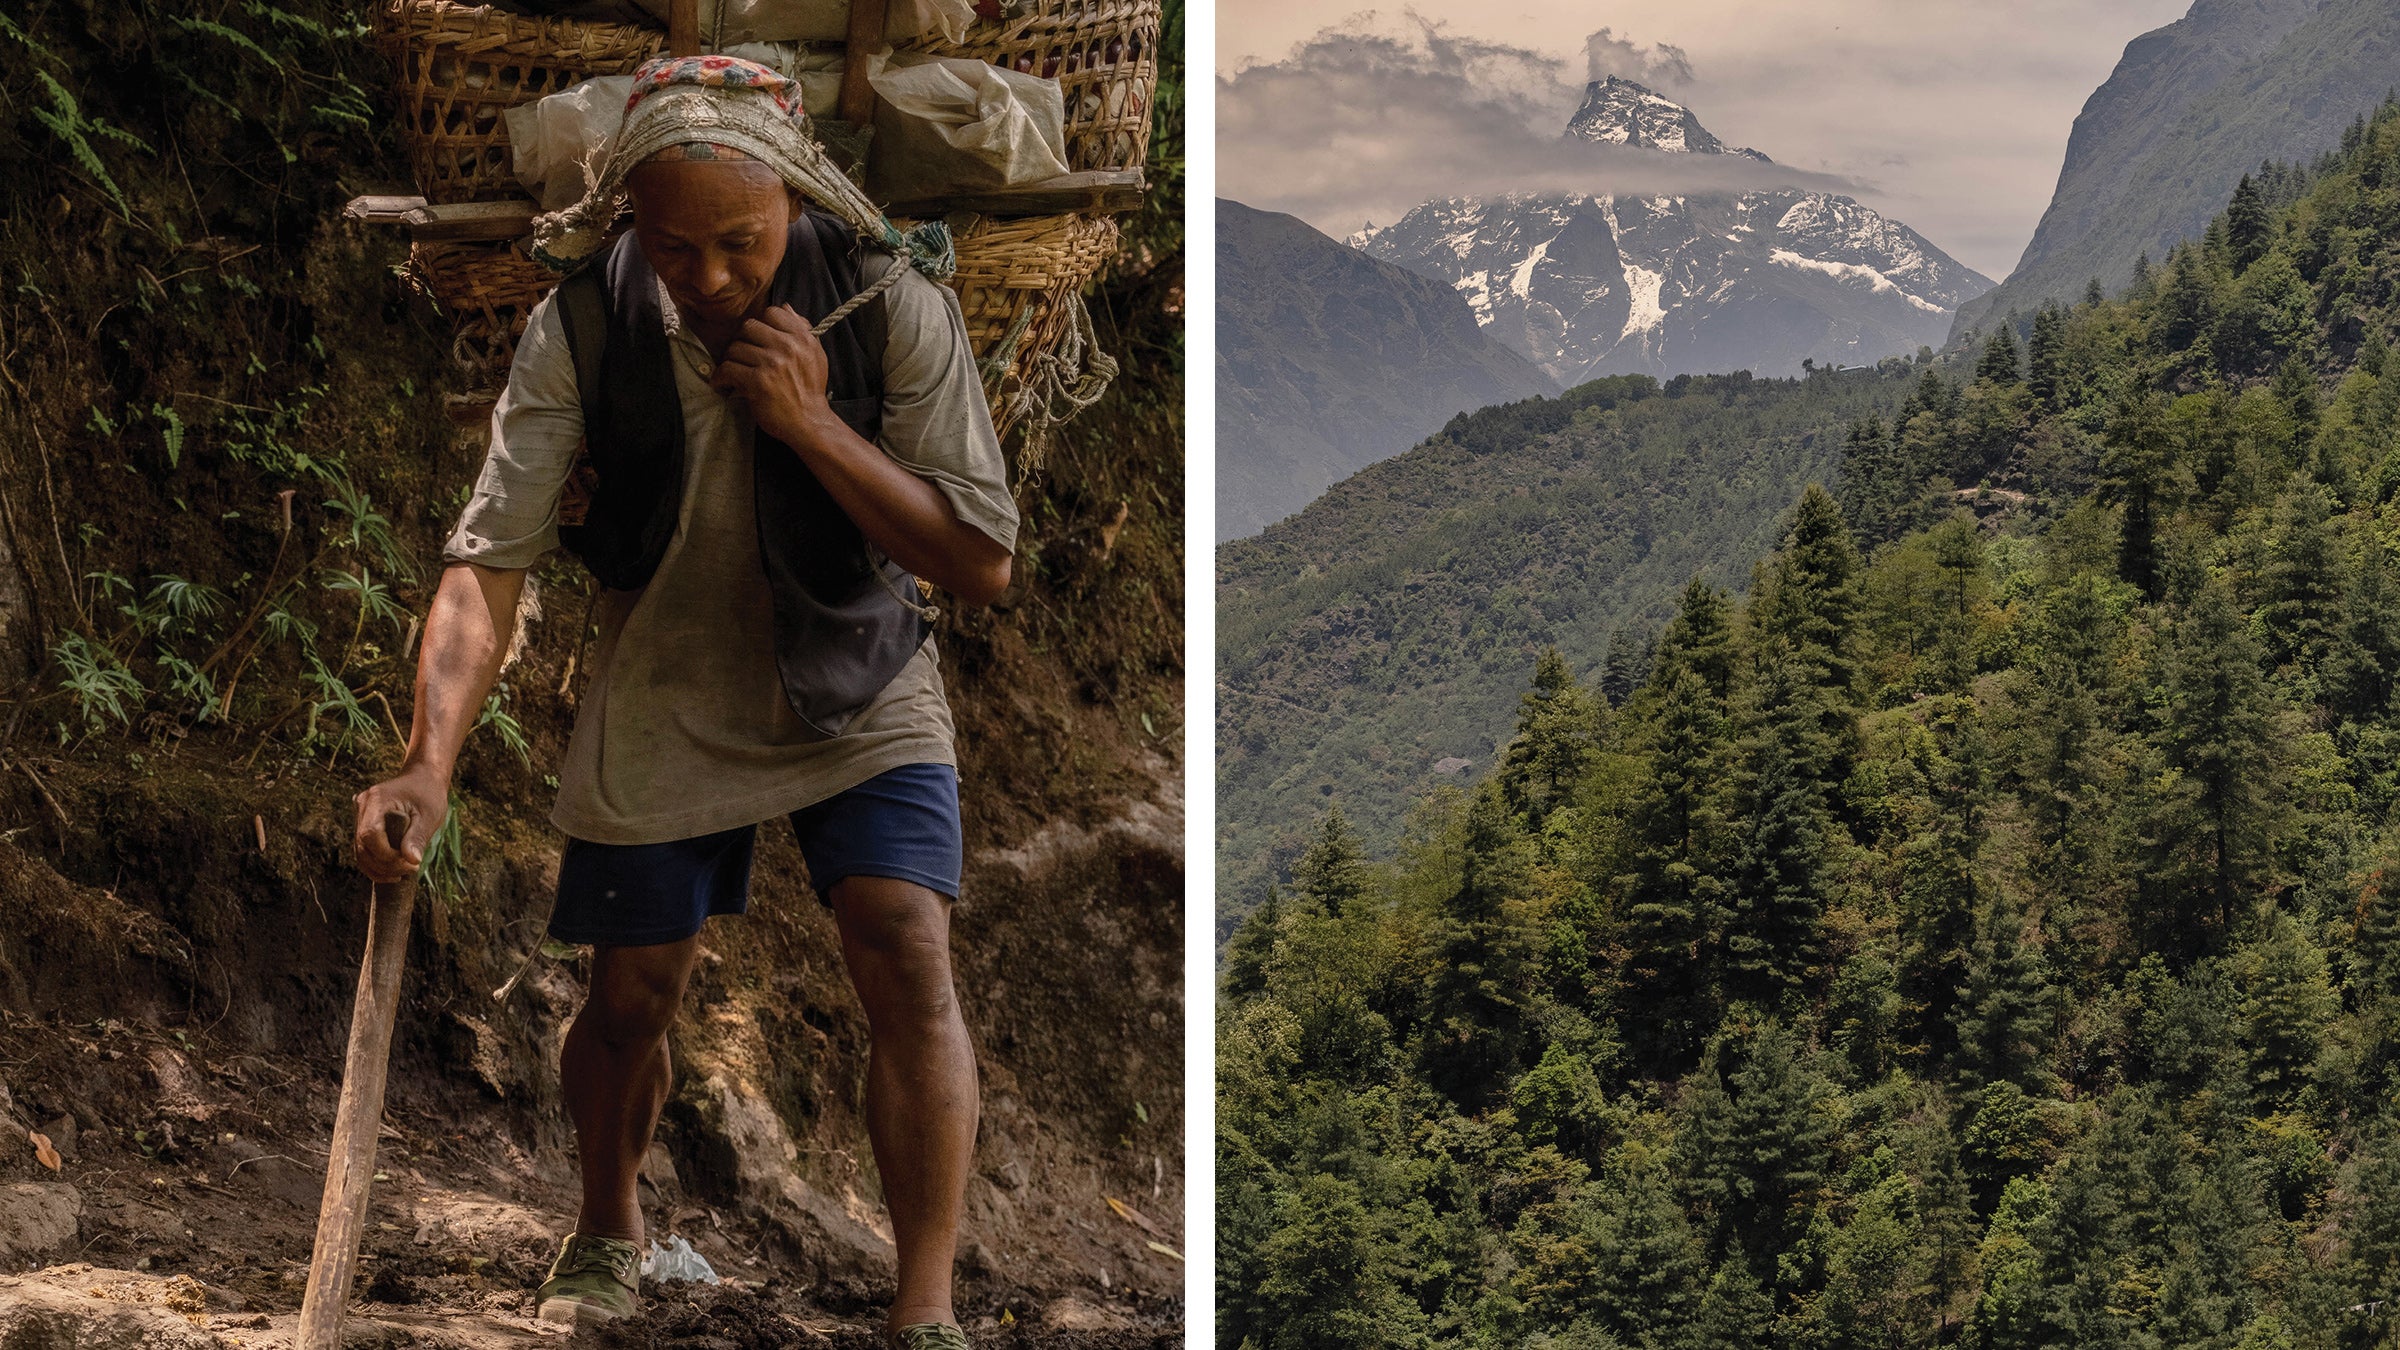 Left: a man heading to Namche Bazaar to sell produce. Right: A view of Khumb Yui Lah, just below Lukla.